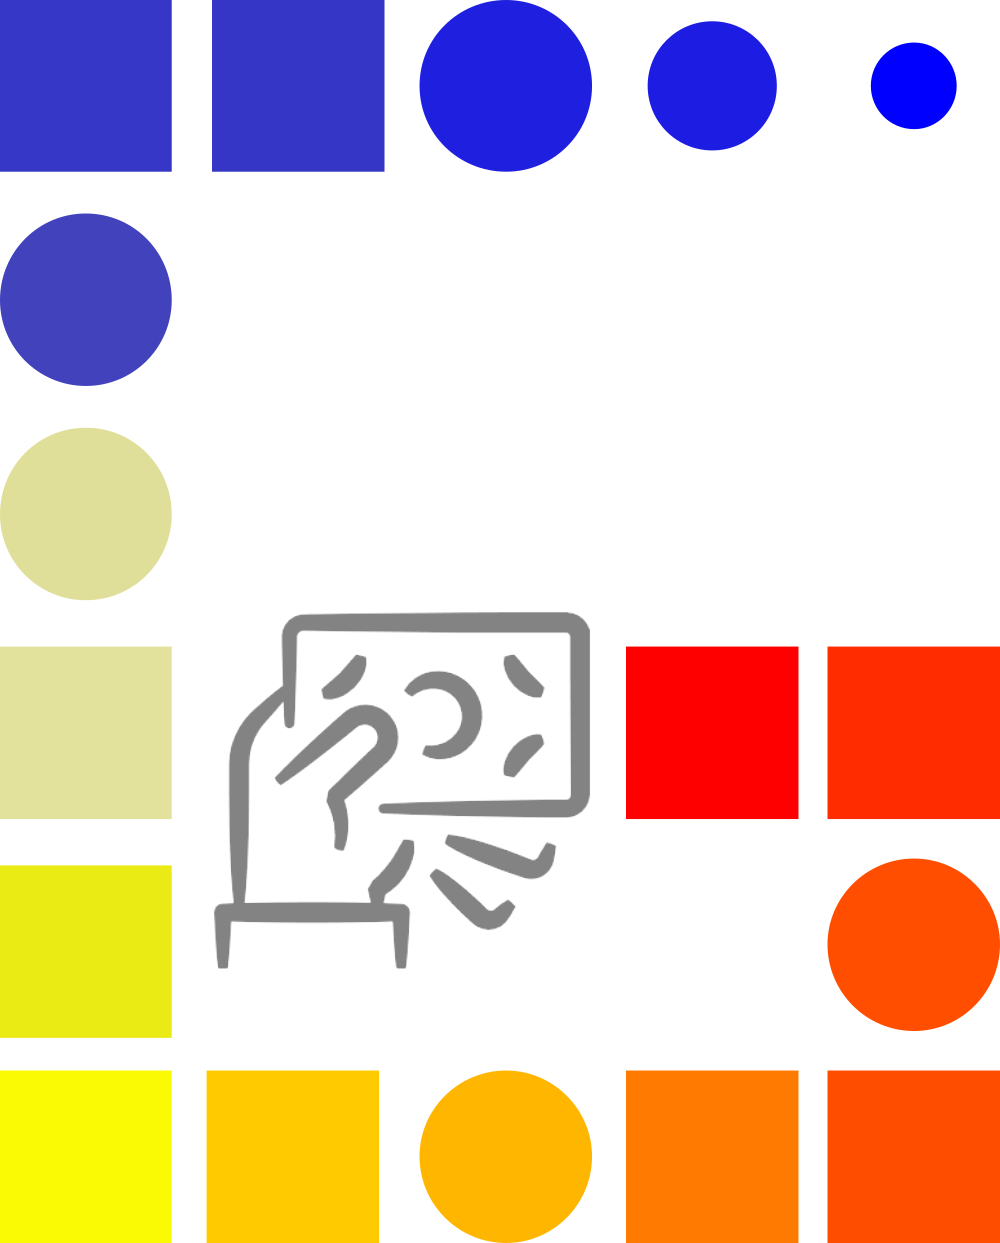 G initial made from circles and squares coloured with a gradient from red to blue through yellow.